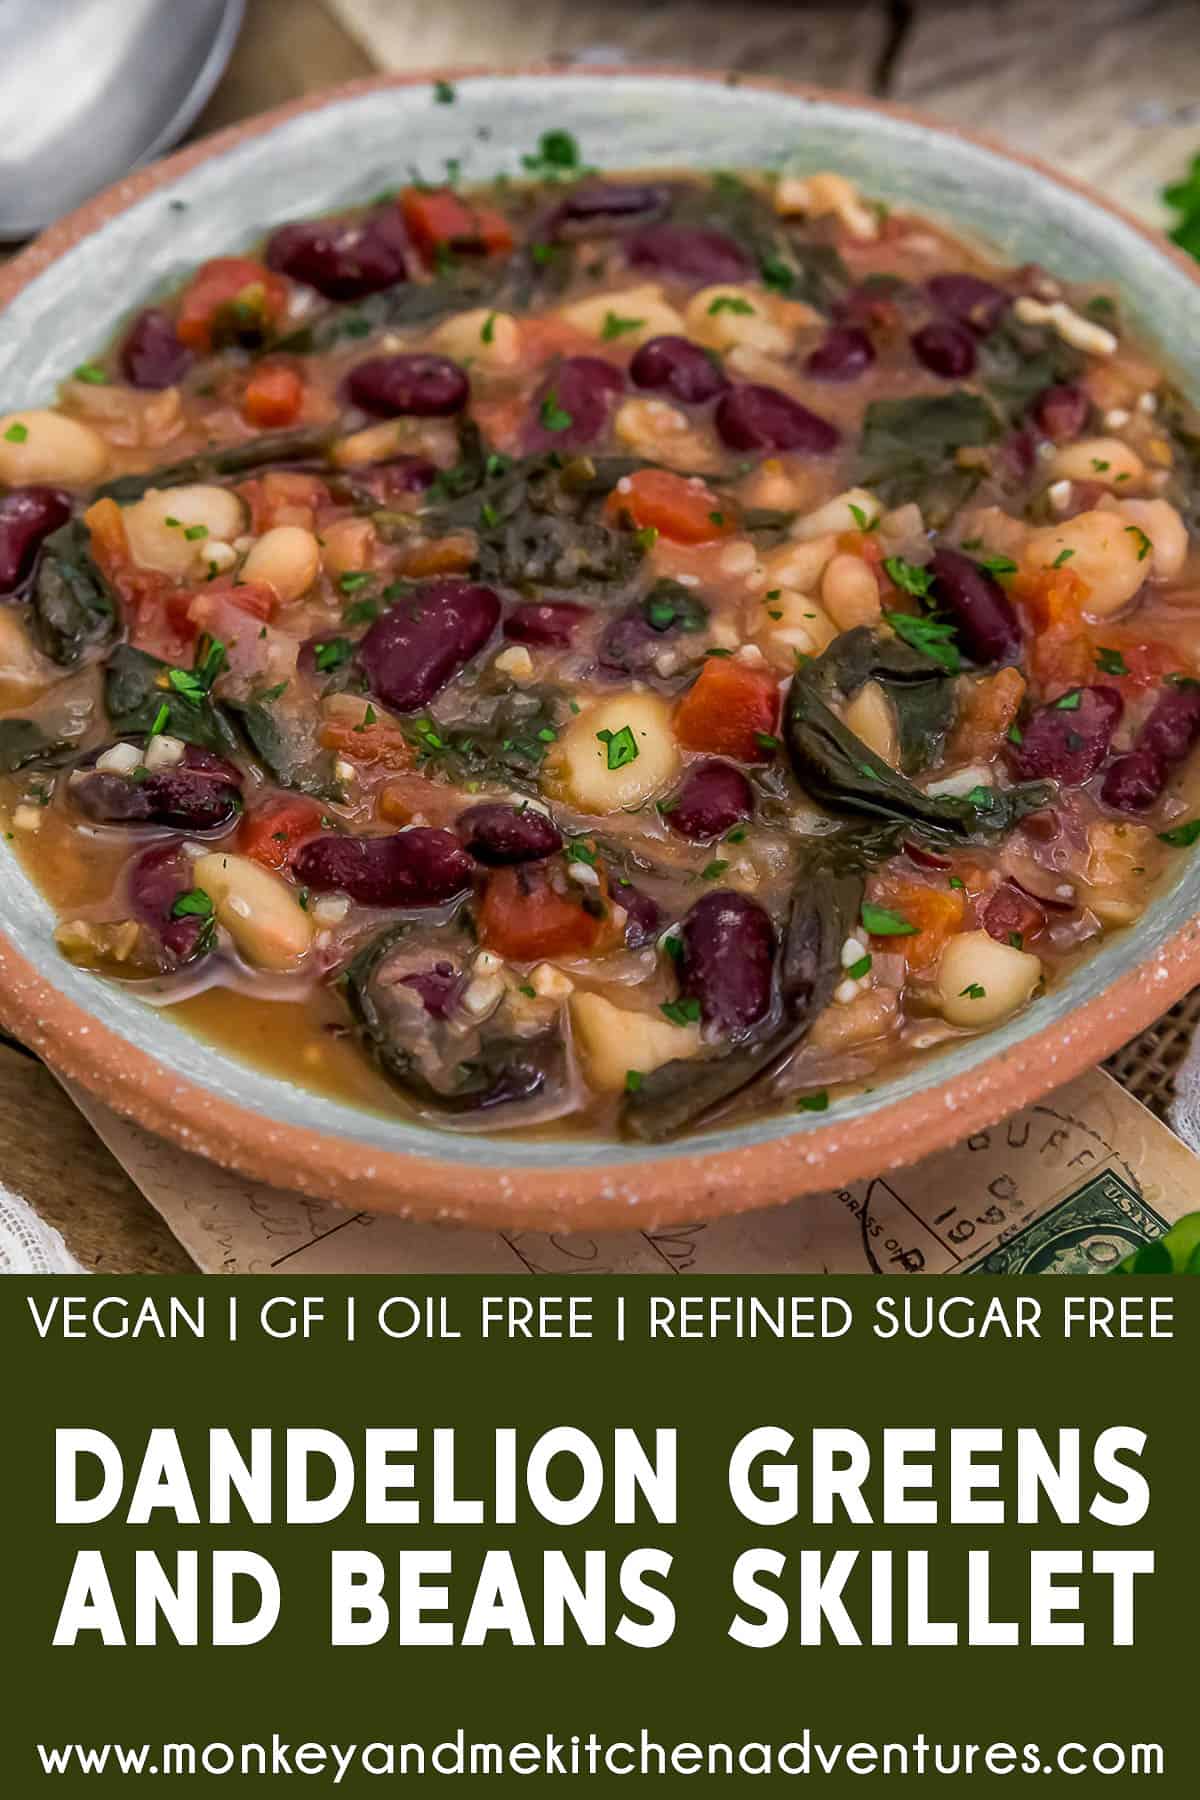 Dandelion Greens and Beans Skillet with text description